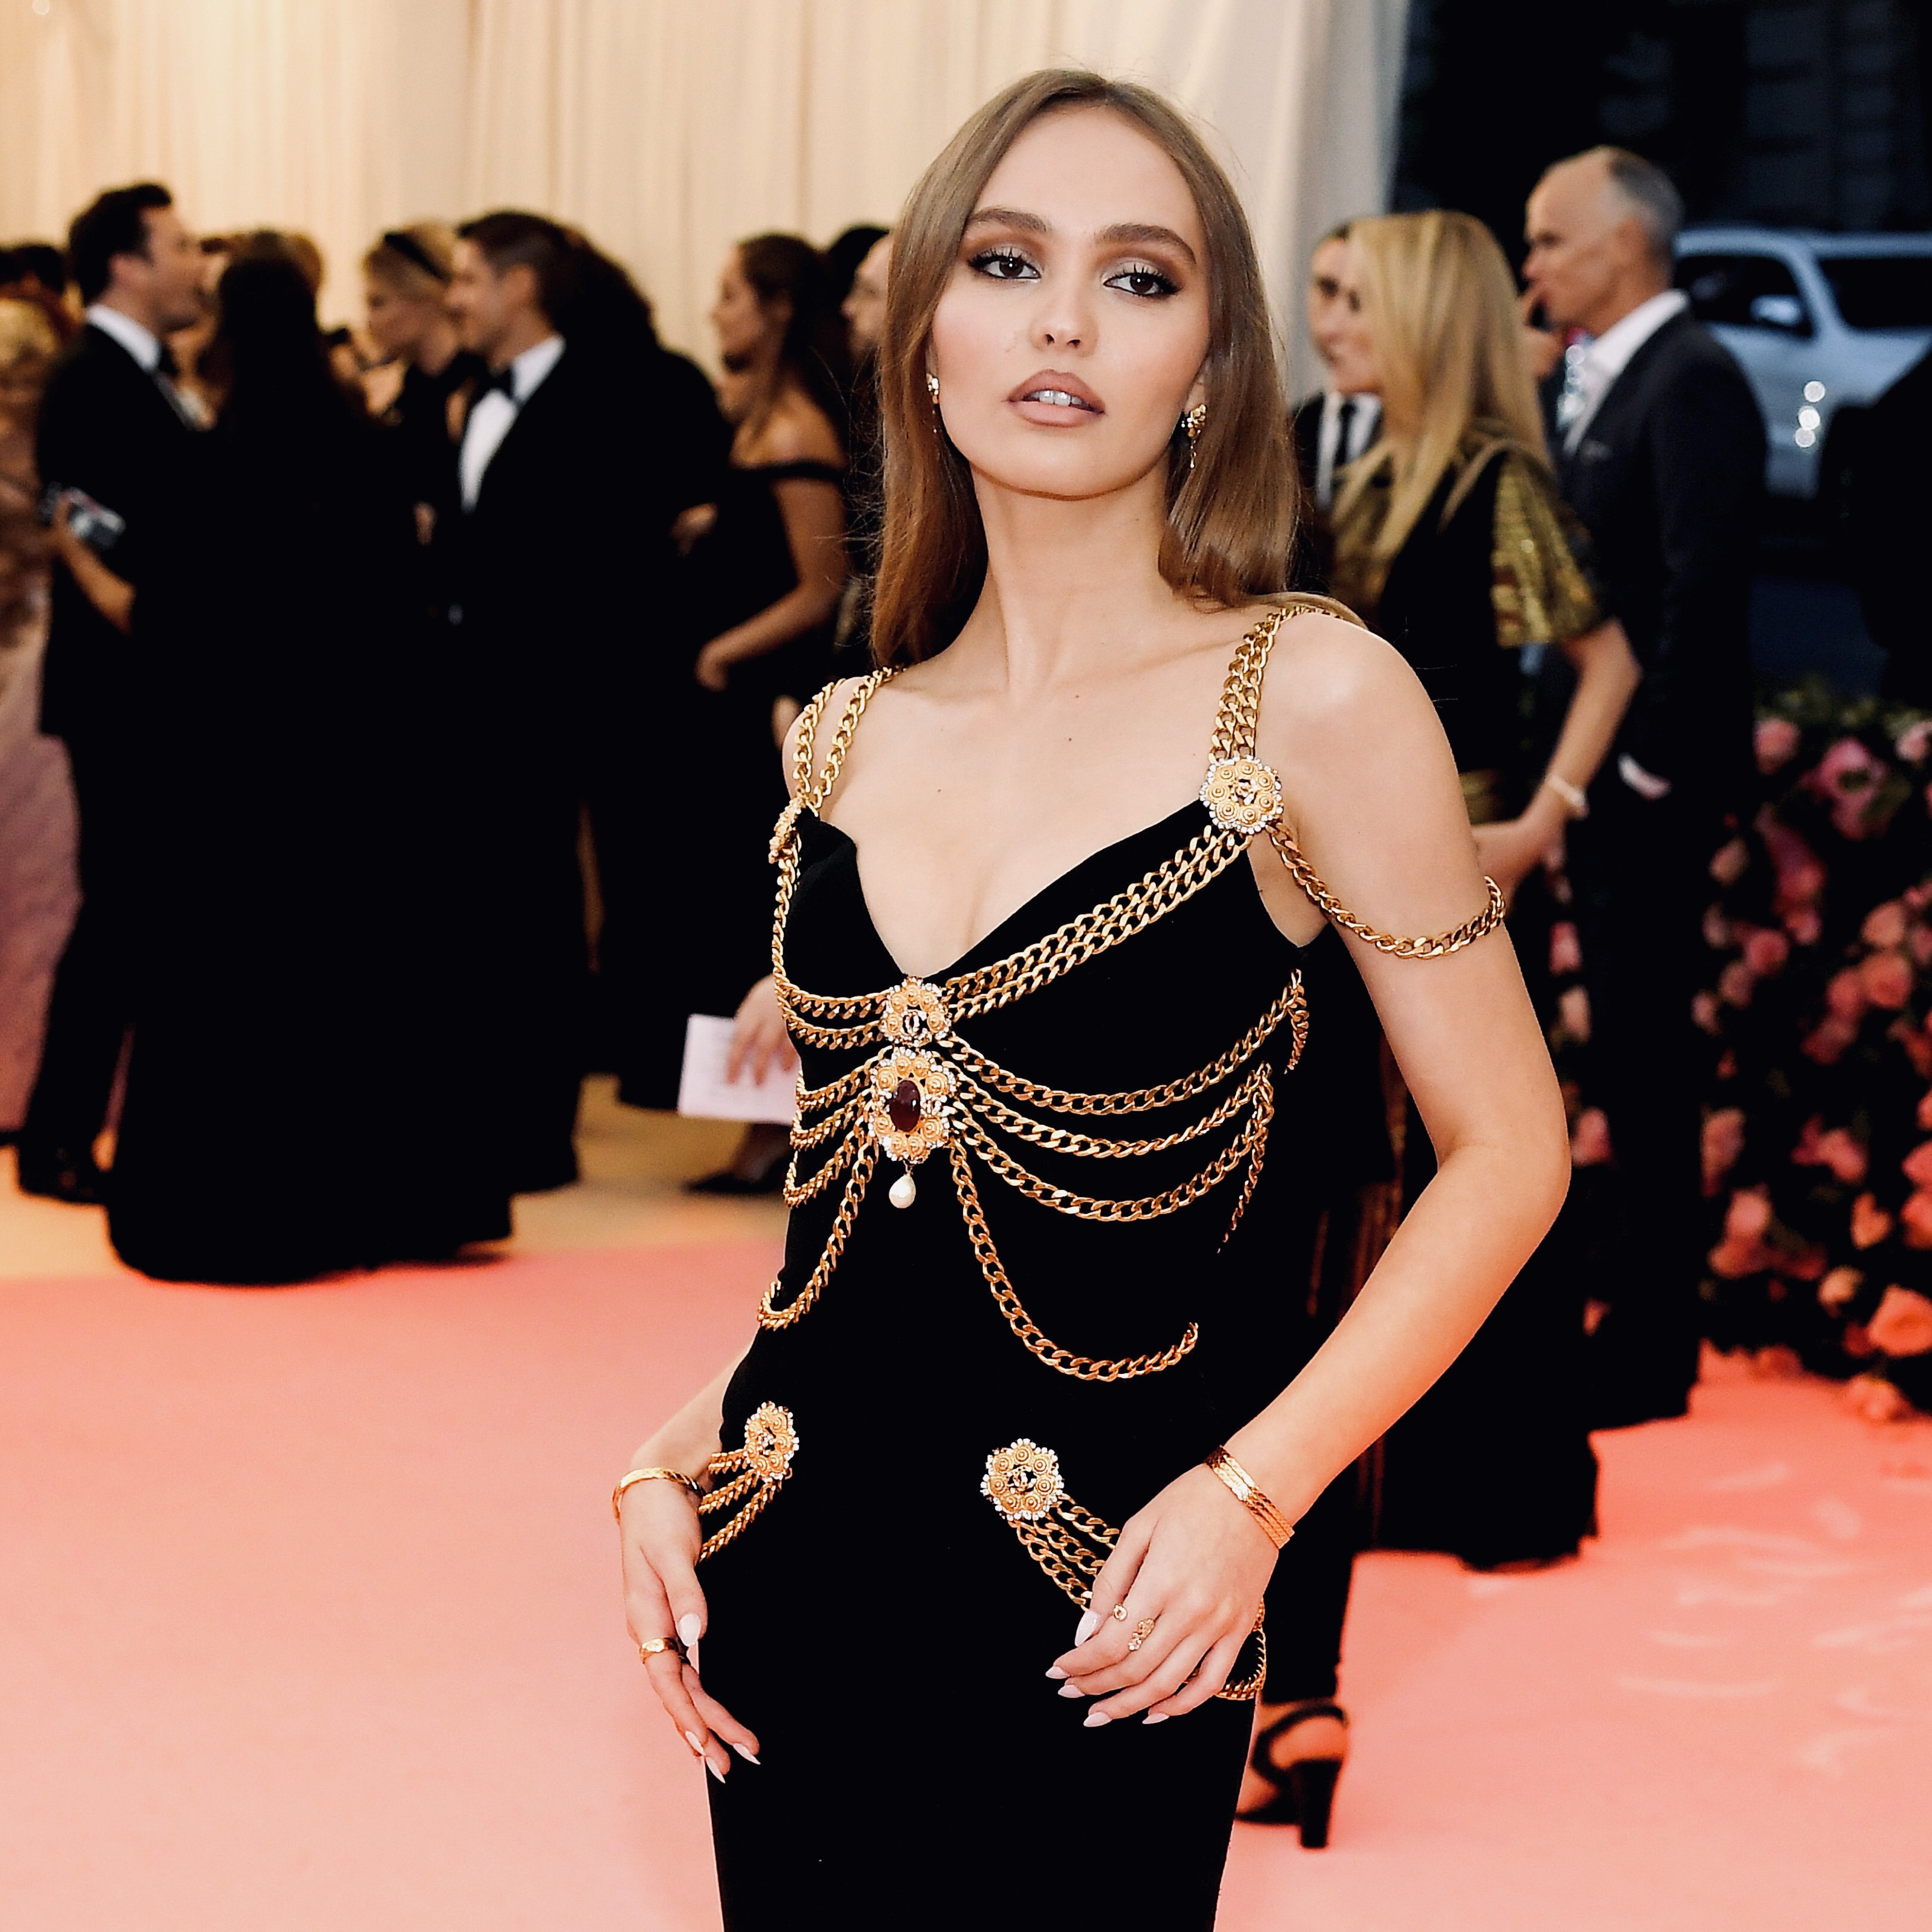 Magnet Chanel Dress That Lily Rose Depp Wore to The Met Gala 2019 Vinyl  Decal Magnetic Sticker 5